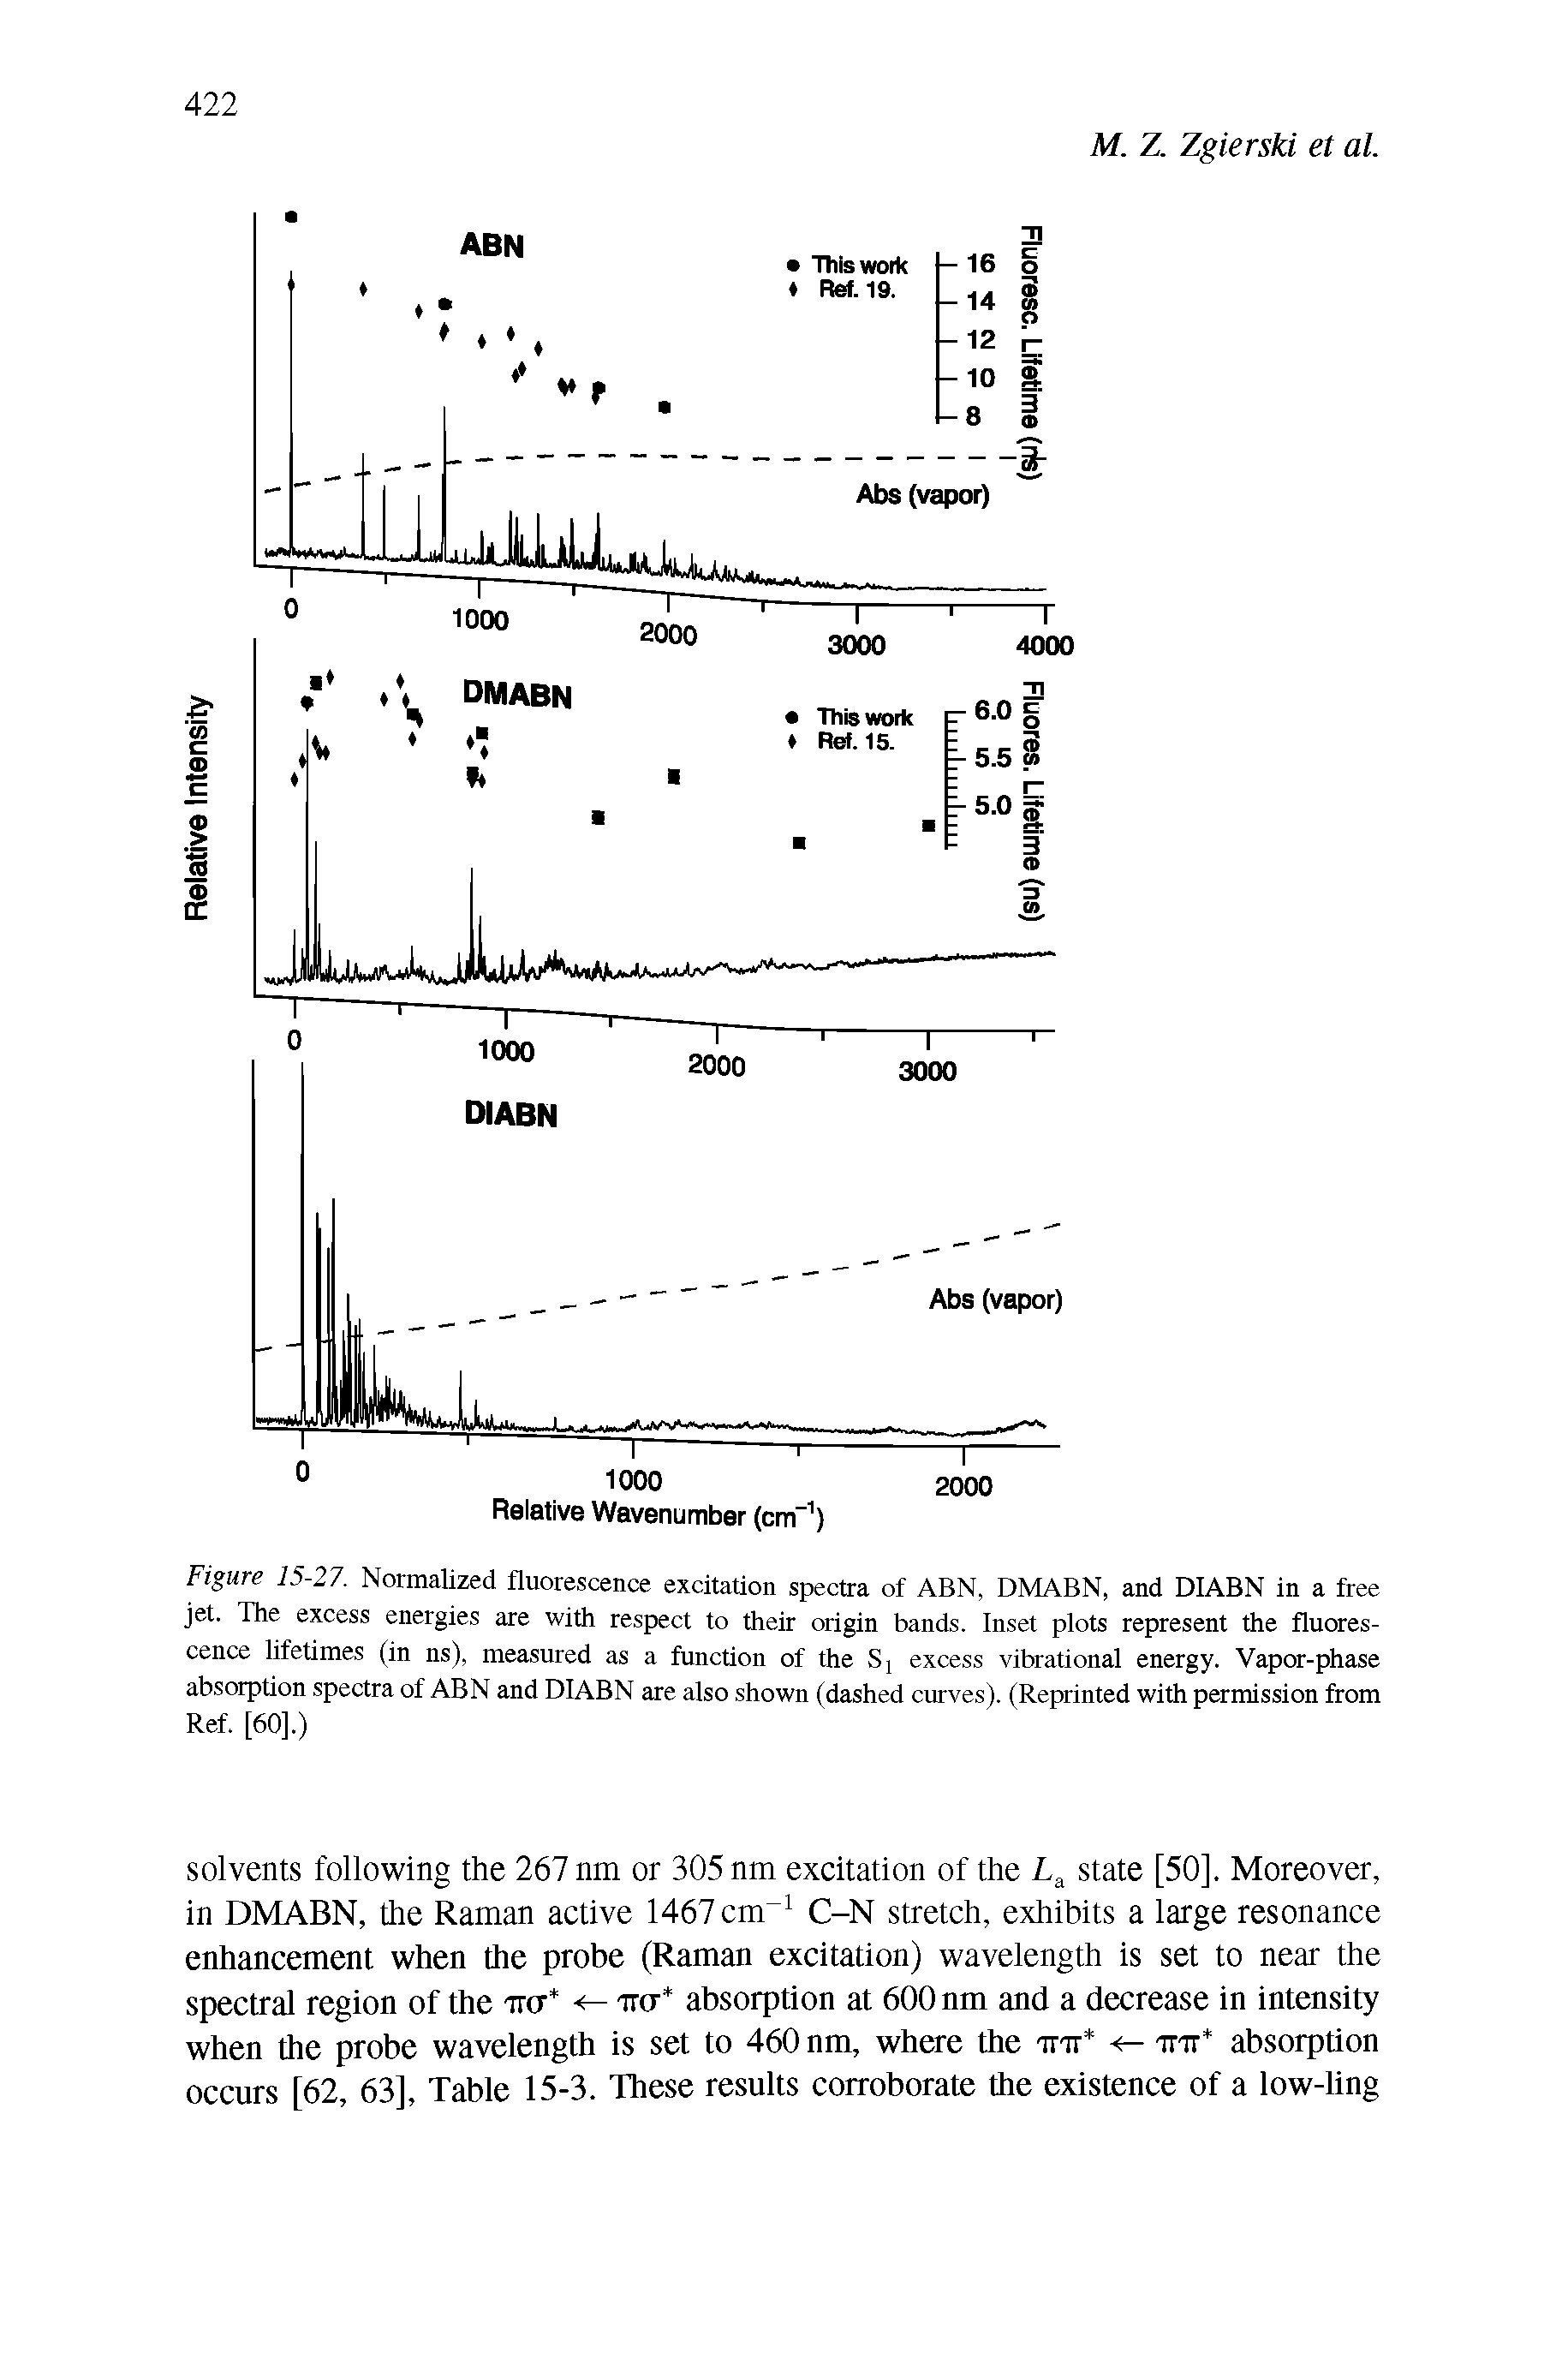 Figure 15-27. Normalized fluorescence excitation spectra of ABN, DMABN, and DIABN in a free jet. The excess energies are with respect to their origin bands. Inset plots represent the fluorescence lifetimes (in ns), measured as a function of the S excess vibrational energy. Vapor-phase absorption spectra of ABN and DIABN are also shown (dashed curves). (Reprinted with permission from Ref. [60].)...